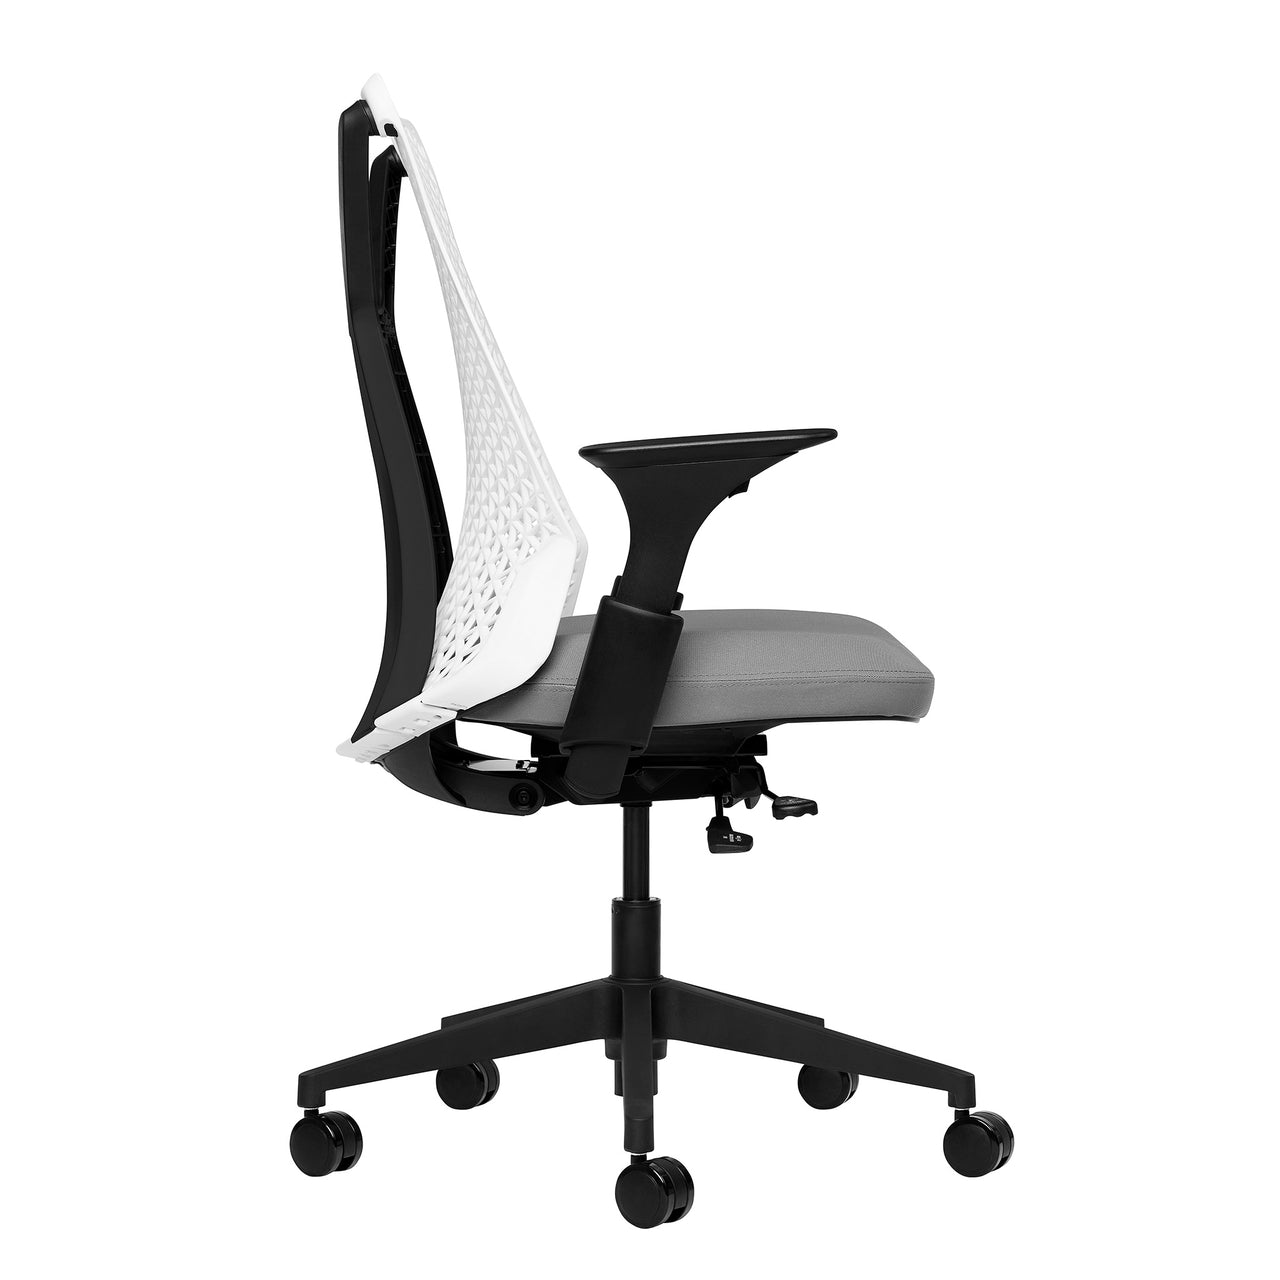 Bowery Management Chair (White/Grey)